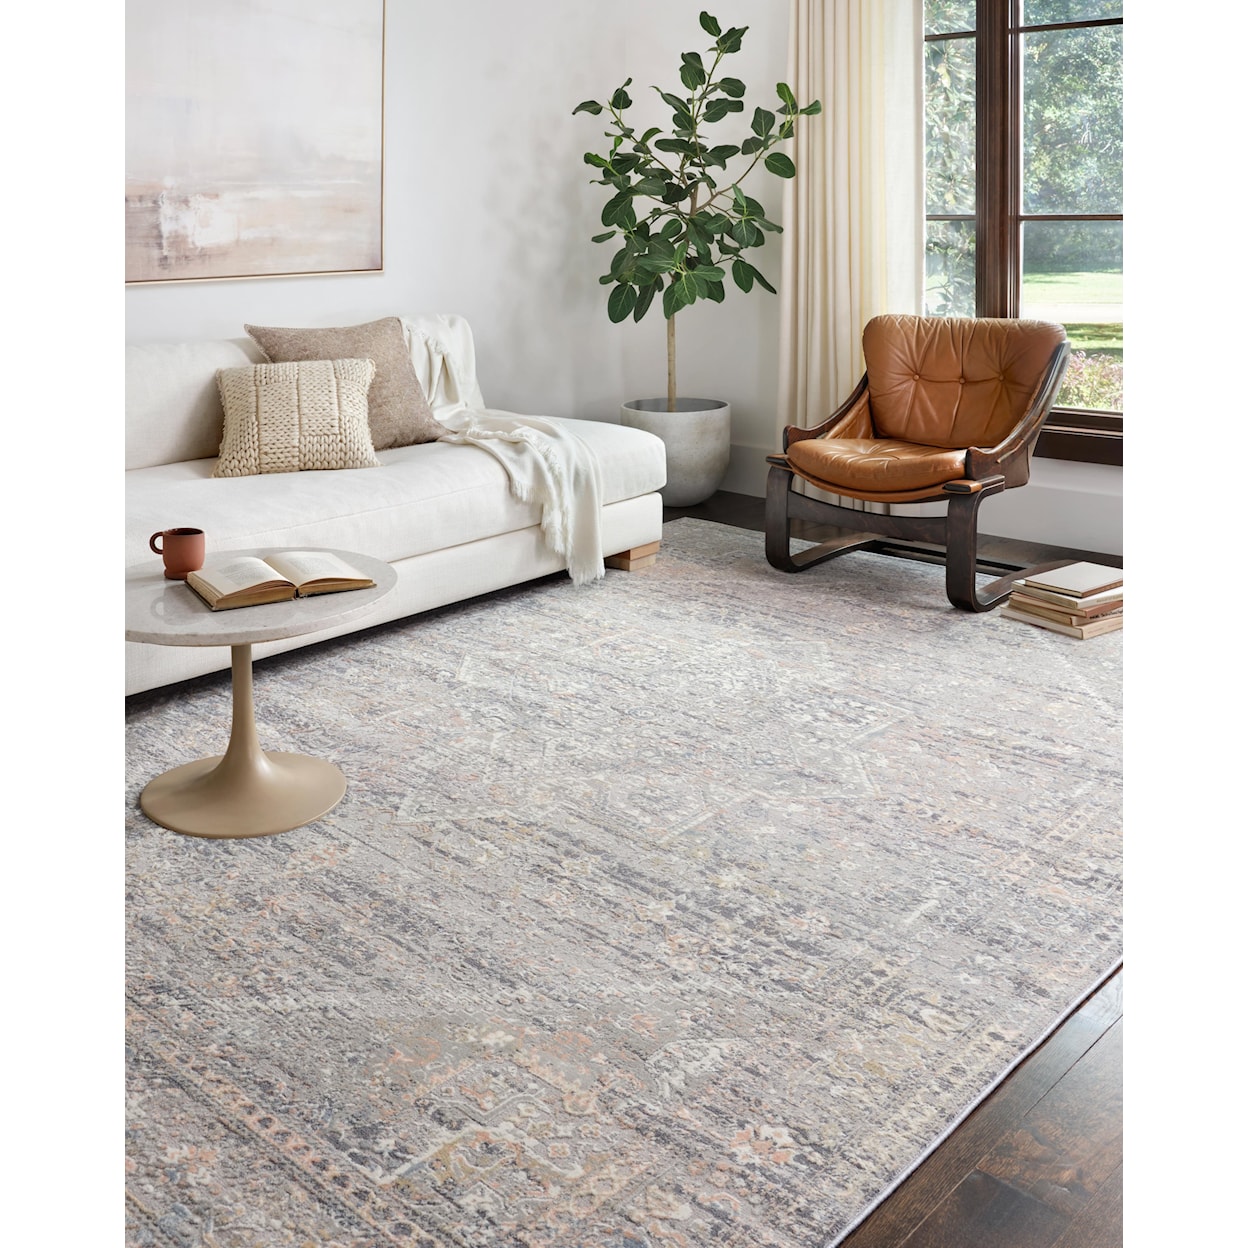 Reeds Rugs Lucia 2'0" x 3'0"  Rug